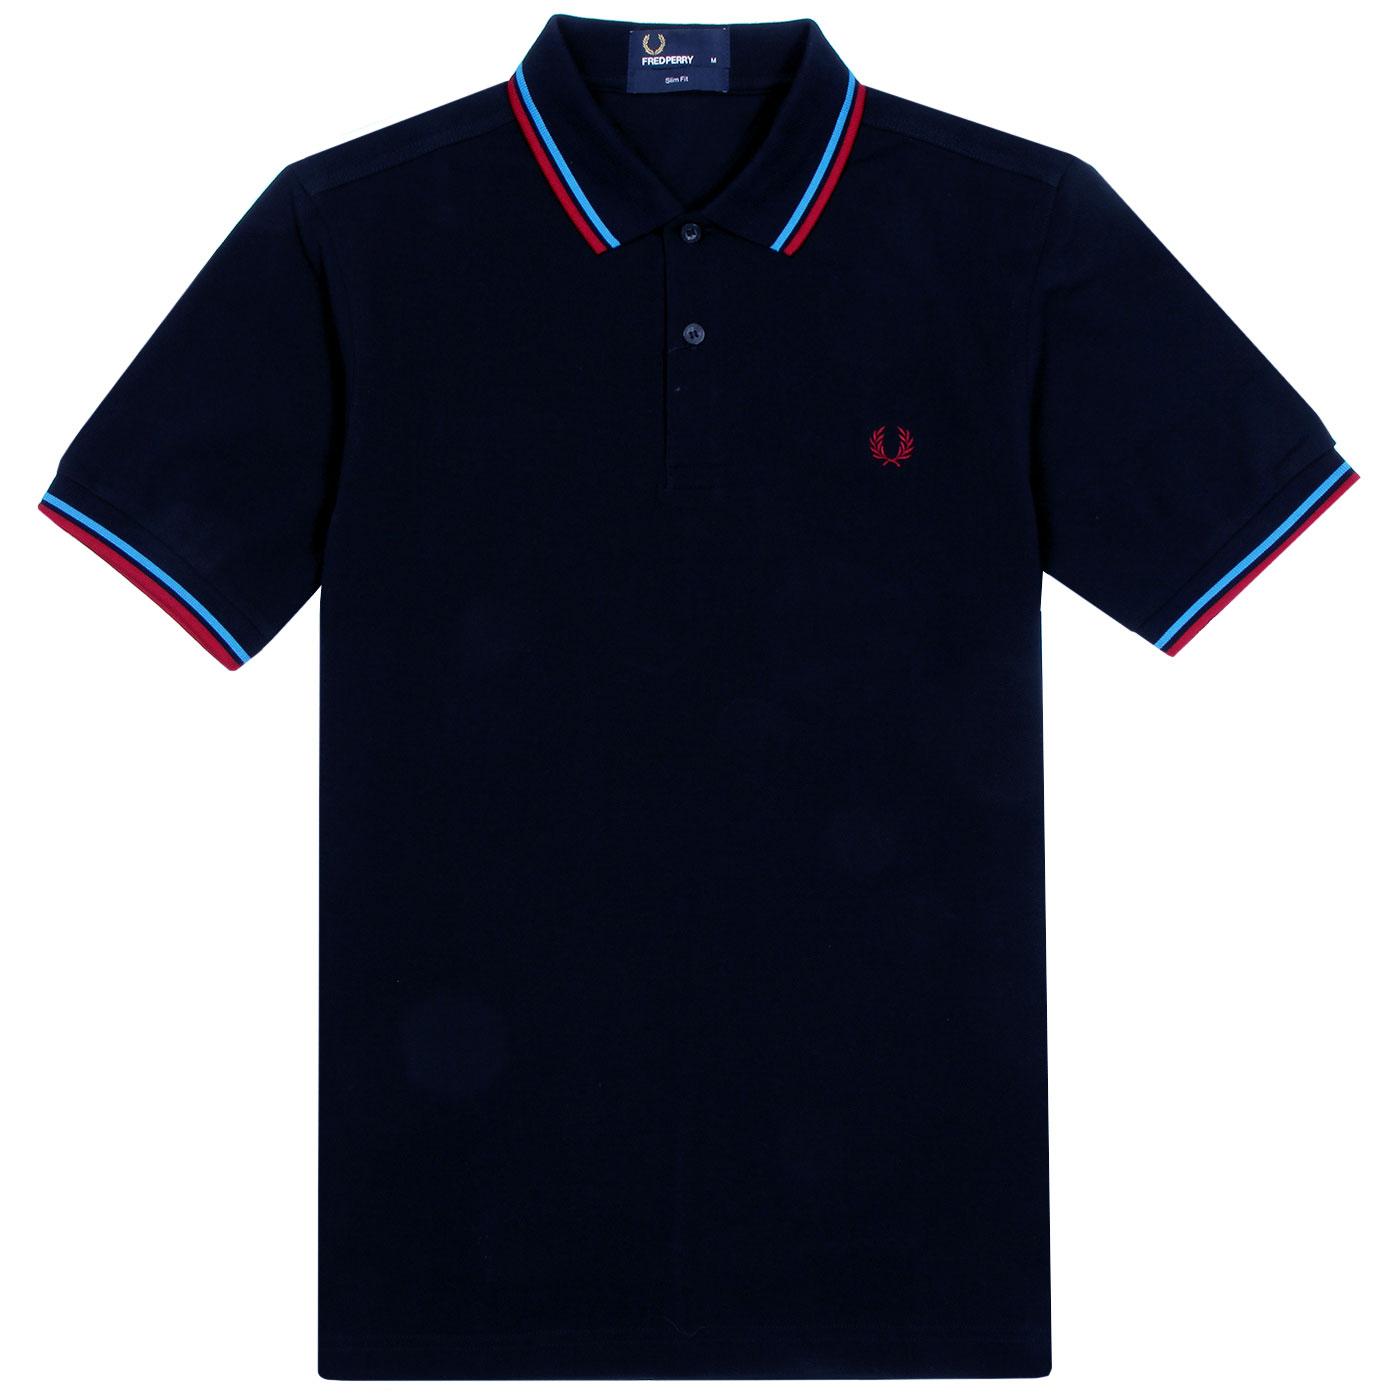 FRED PERRY M3600 Mod Twin Tipped Pique Polo Top N